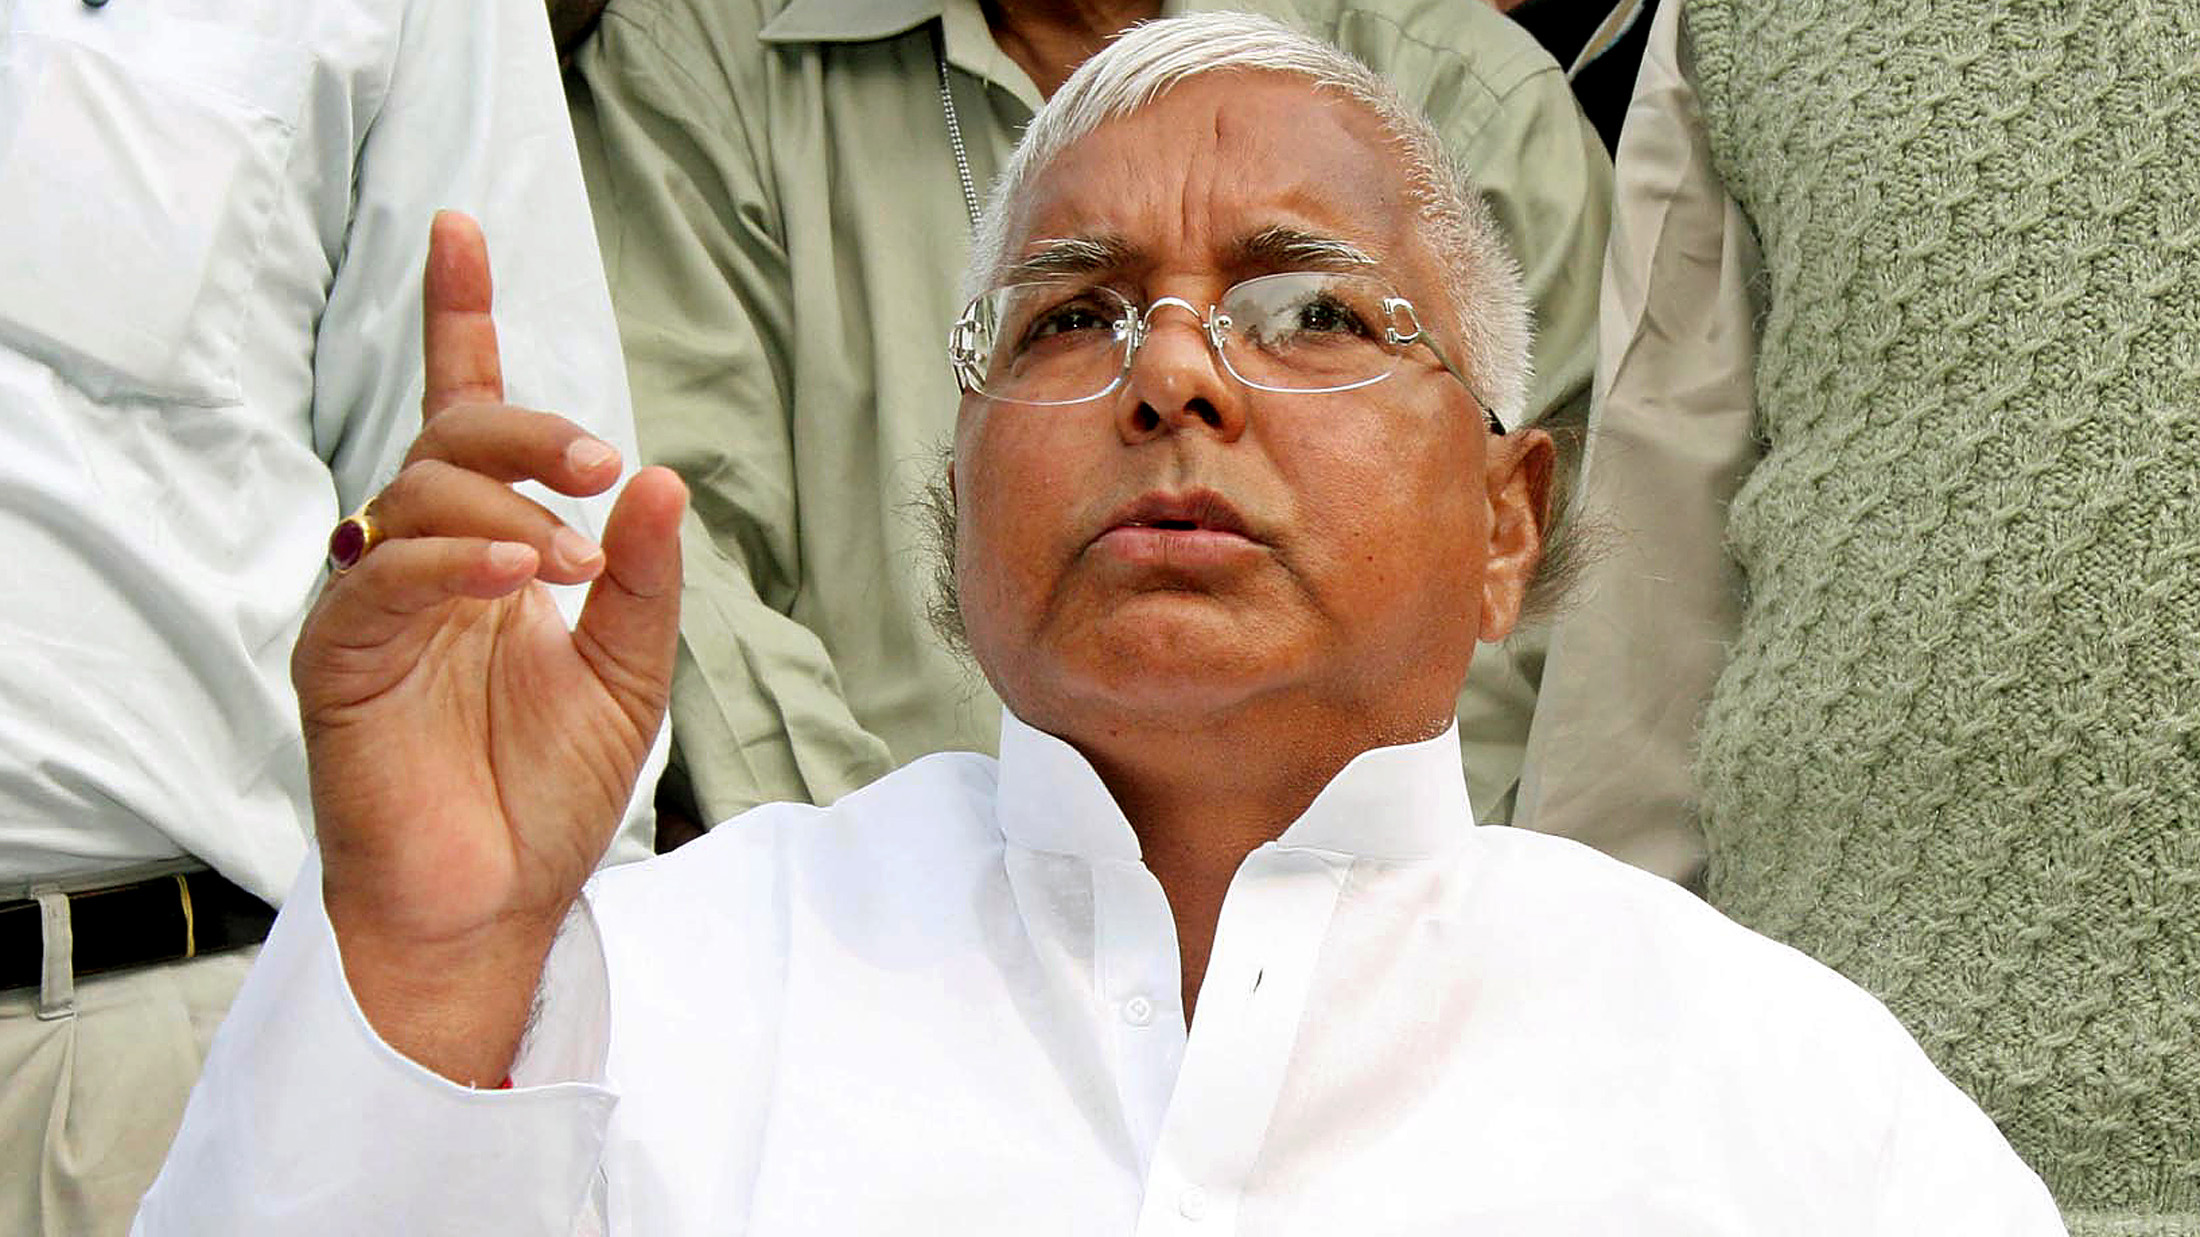 Leader of the Rashtriya Janata Dal (National People's Party or RJD), Lalu Prasad Yadav, speaks during a news conference in the eastern Indian city of Patna November 22, 2005. A key ally of India's ruling coalition was facing defeat in state elections in eastern Bihar on Tuesday as early results trickled in. Analysts said a poll defeat for the RJD could weaken the federal government in New Delhi and make it more vulnerable to pressure, especially on economic policies. REUTERS/Krishna Murari Kishan - RTR1BGZ9